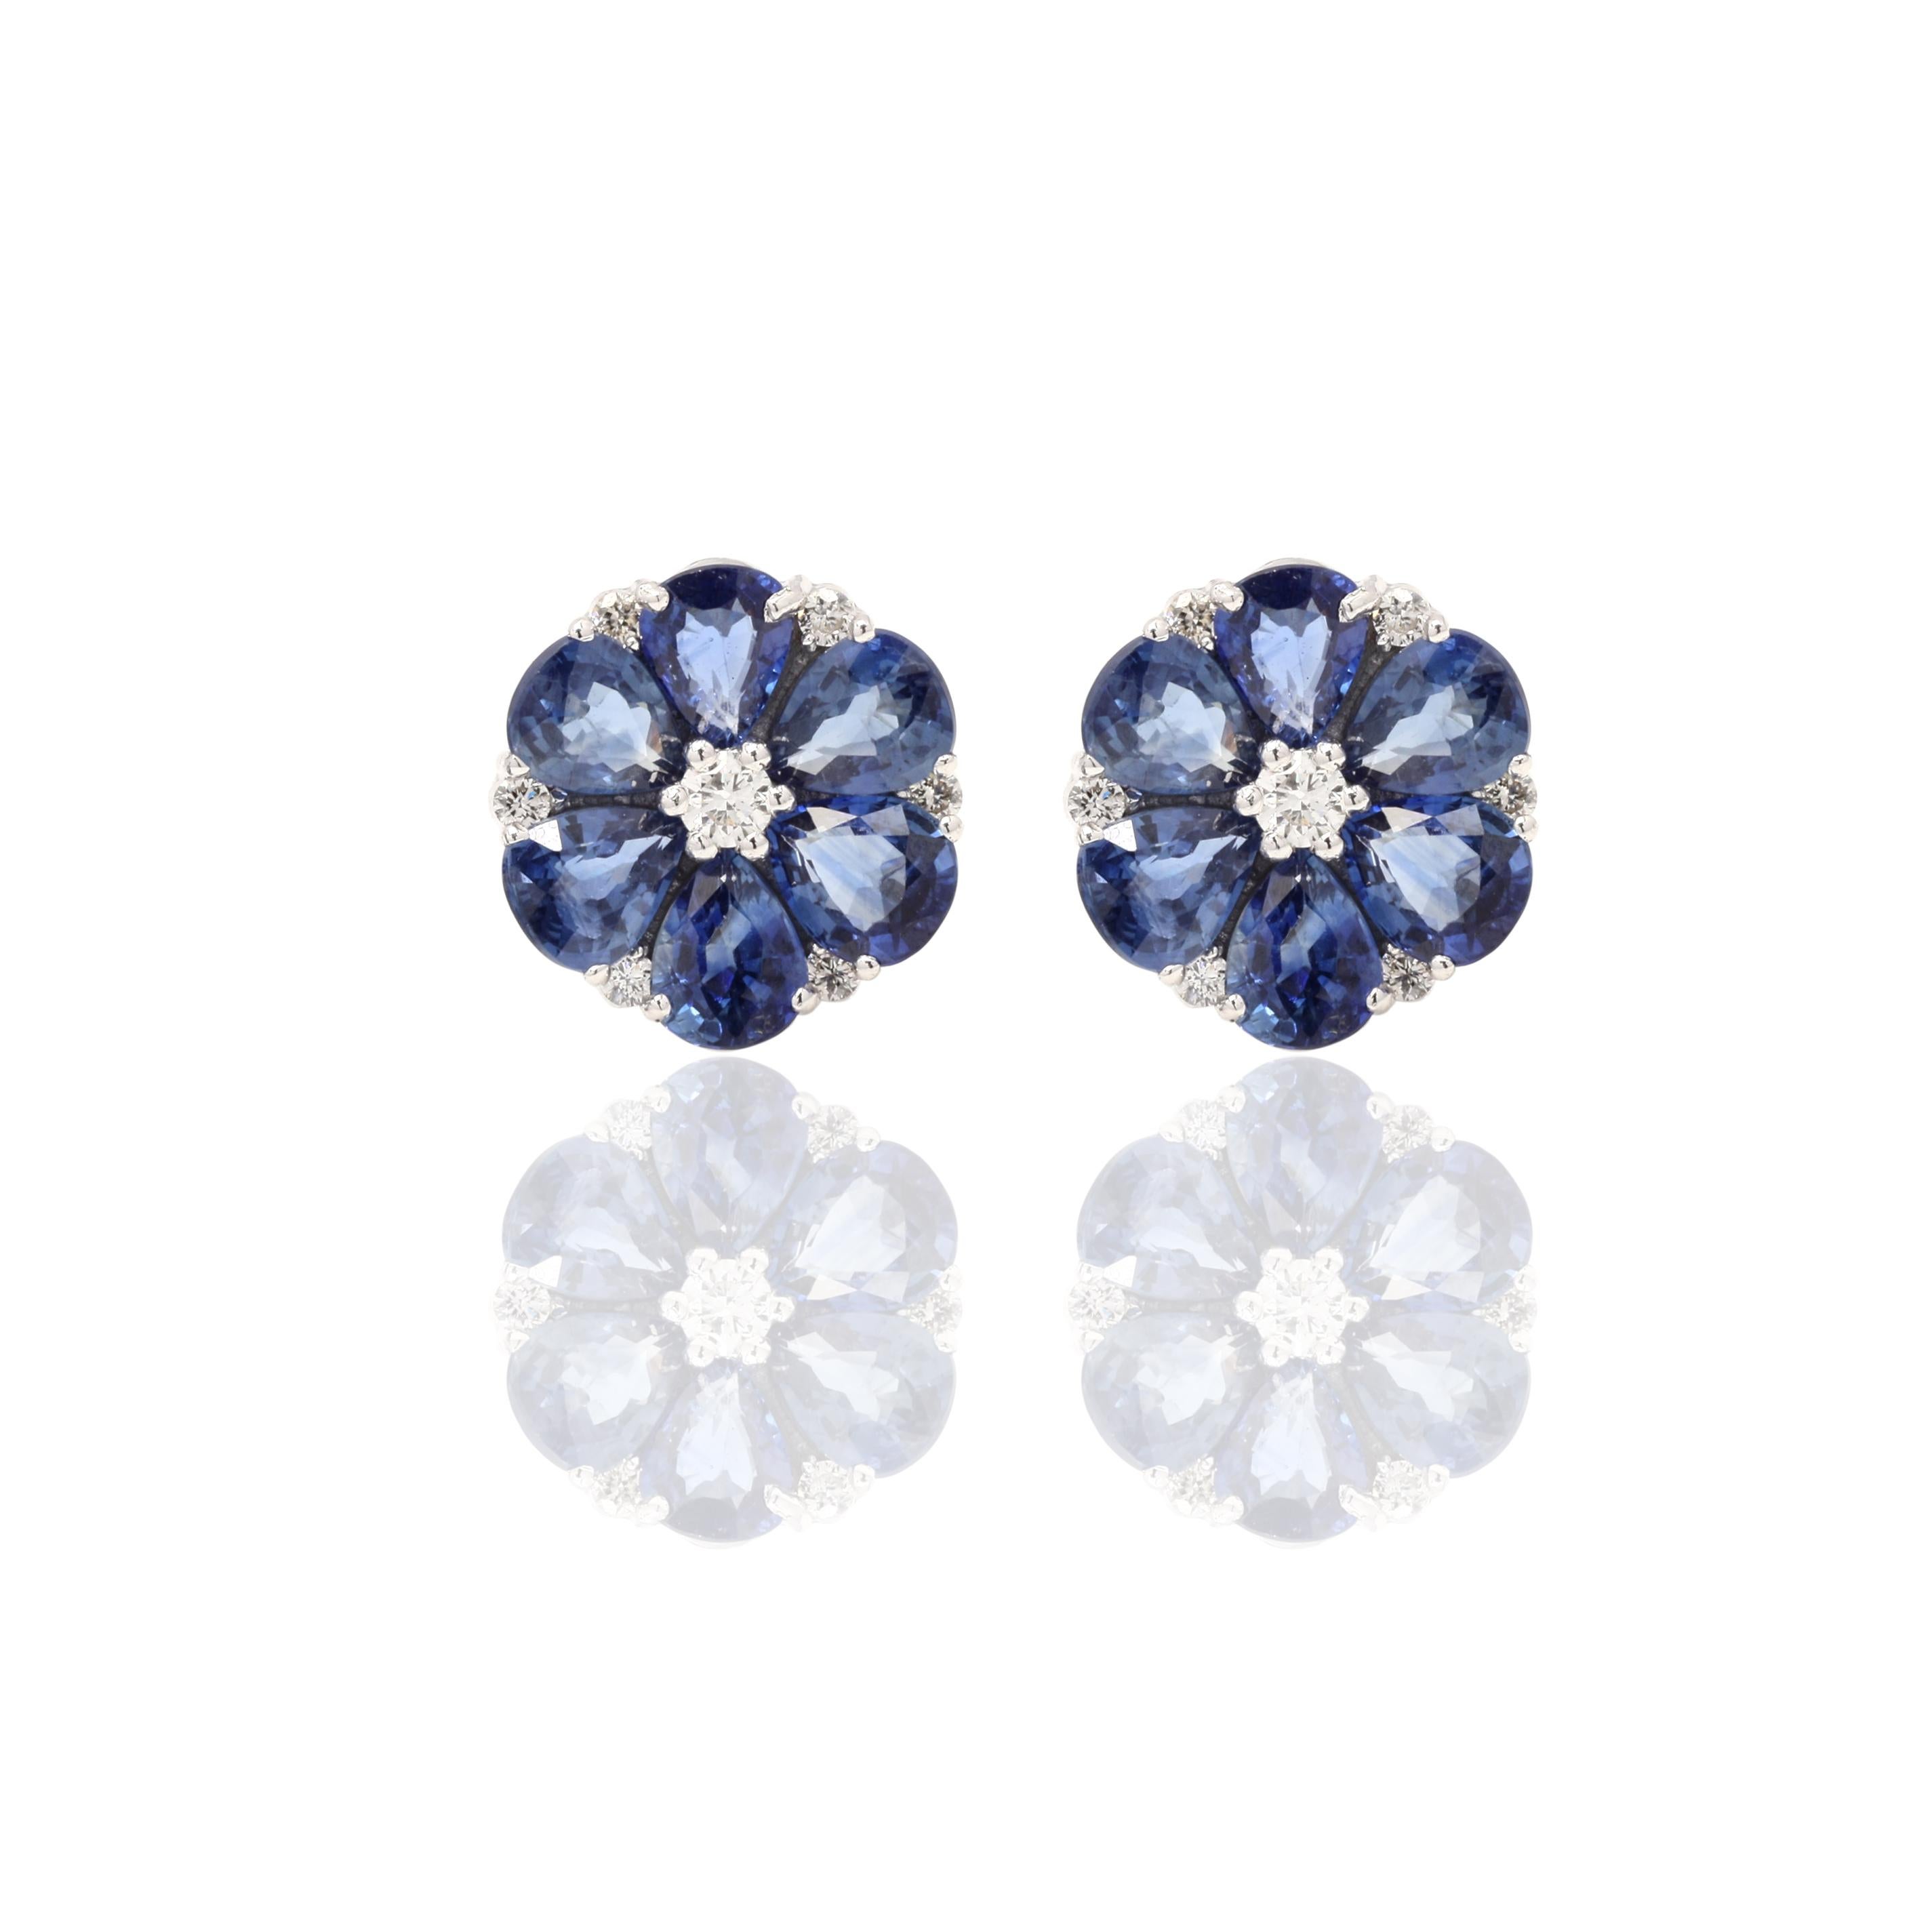 Contemporary Stunning Floral Diamond and Sapphire Stud Earring Embedded in 18K White Gold For Sale